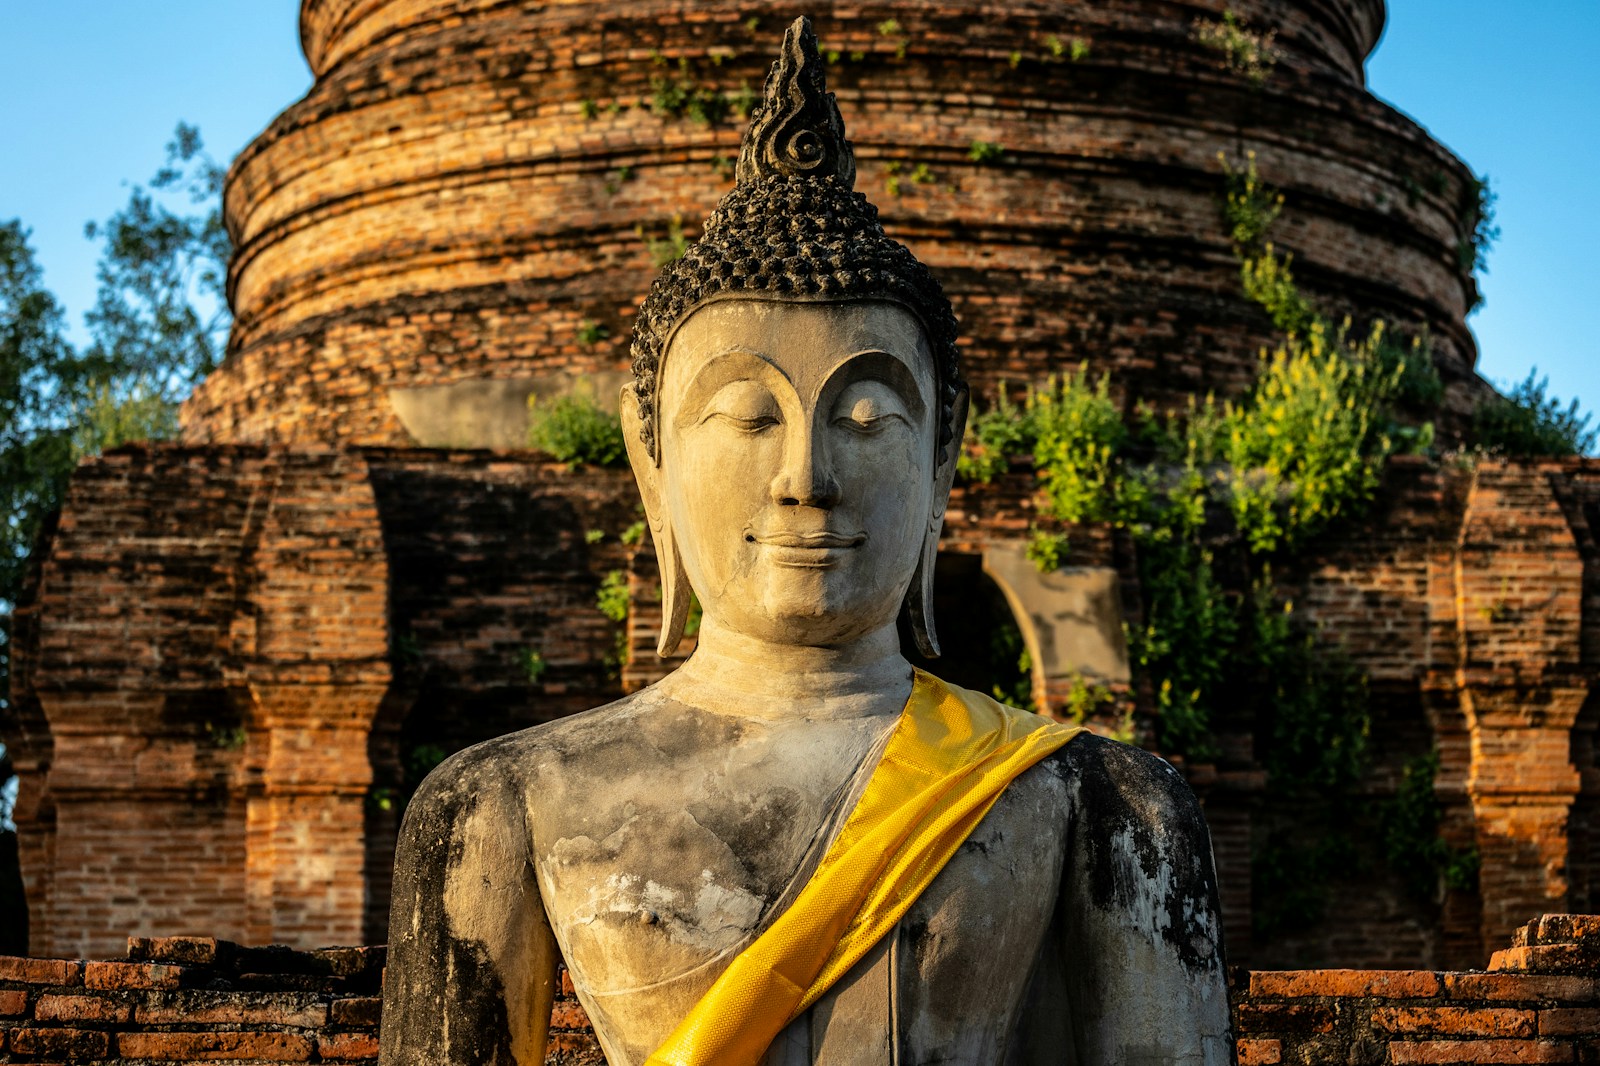 a large buddha statue sitting in front of a brick building